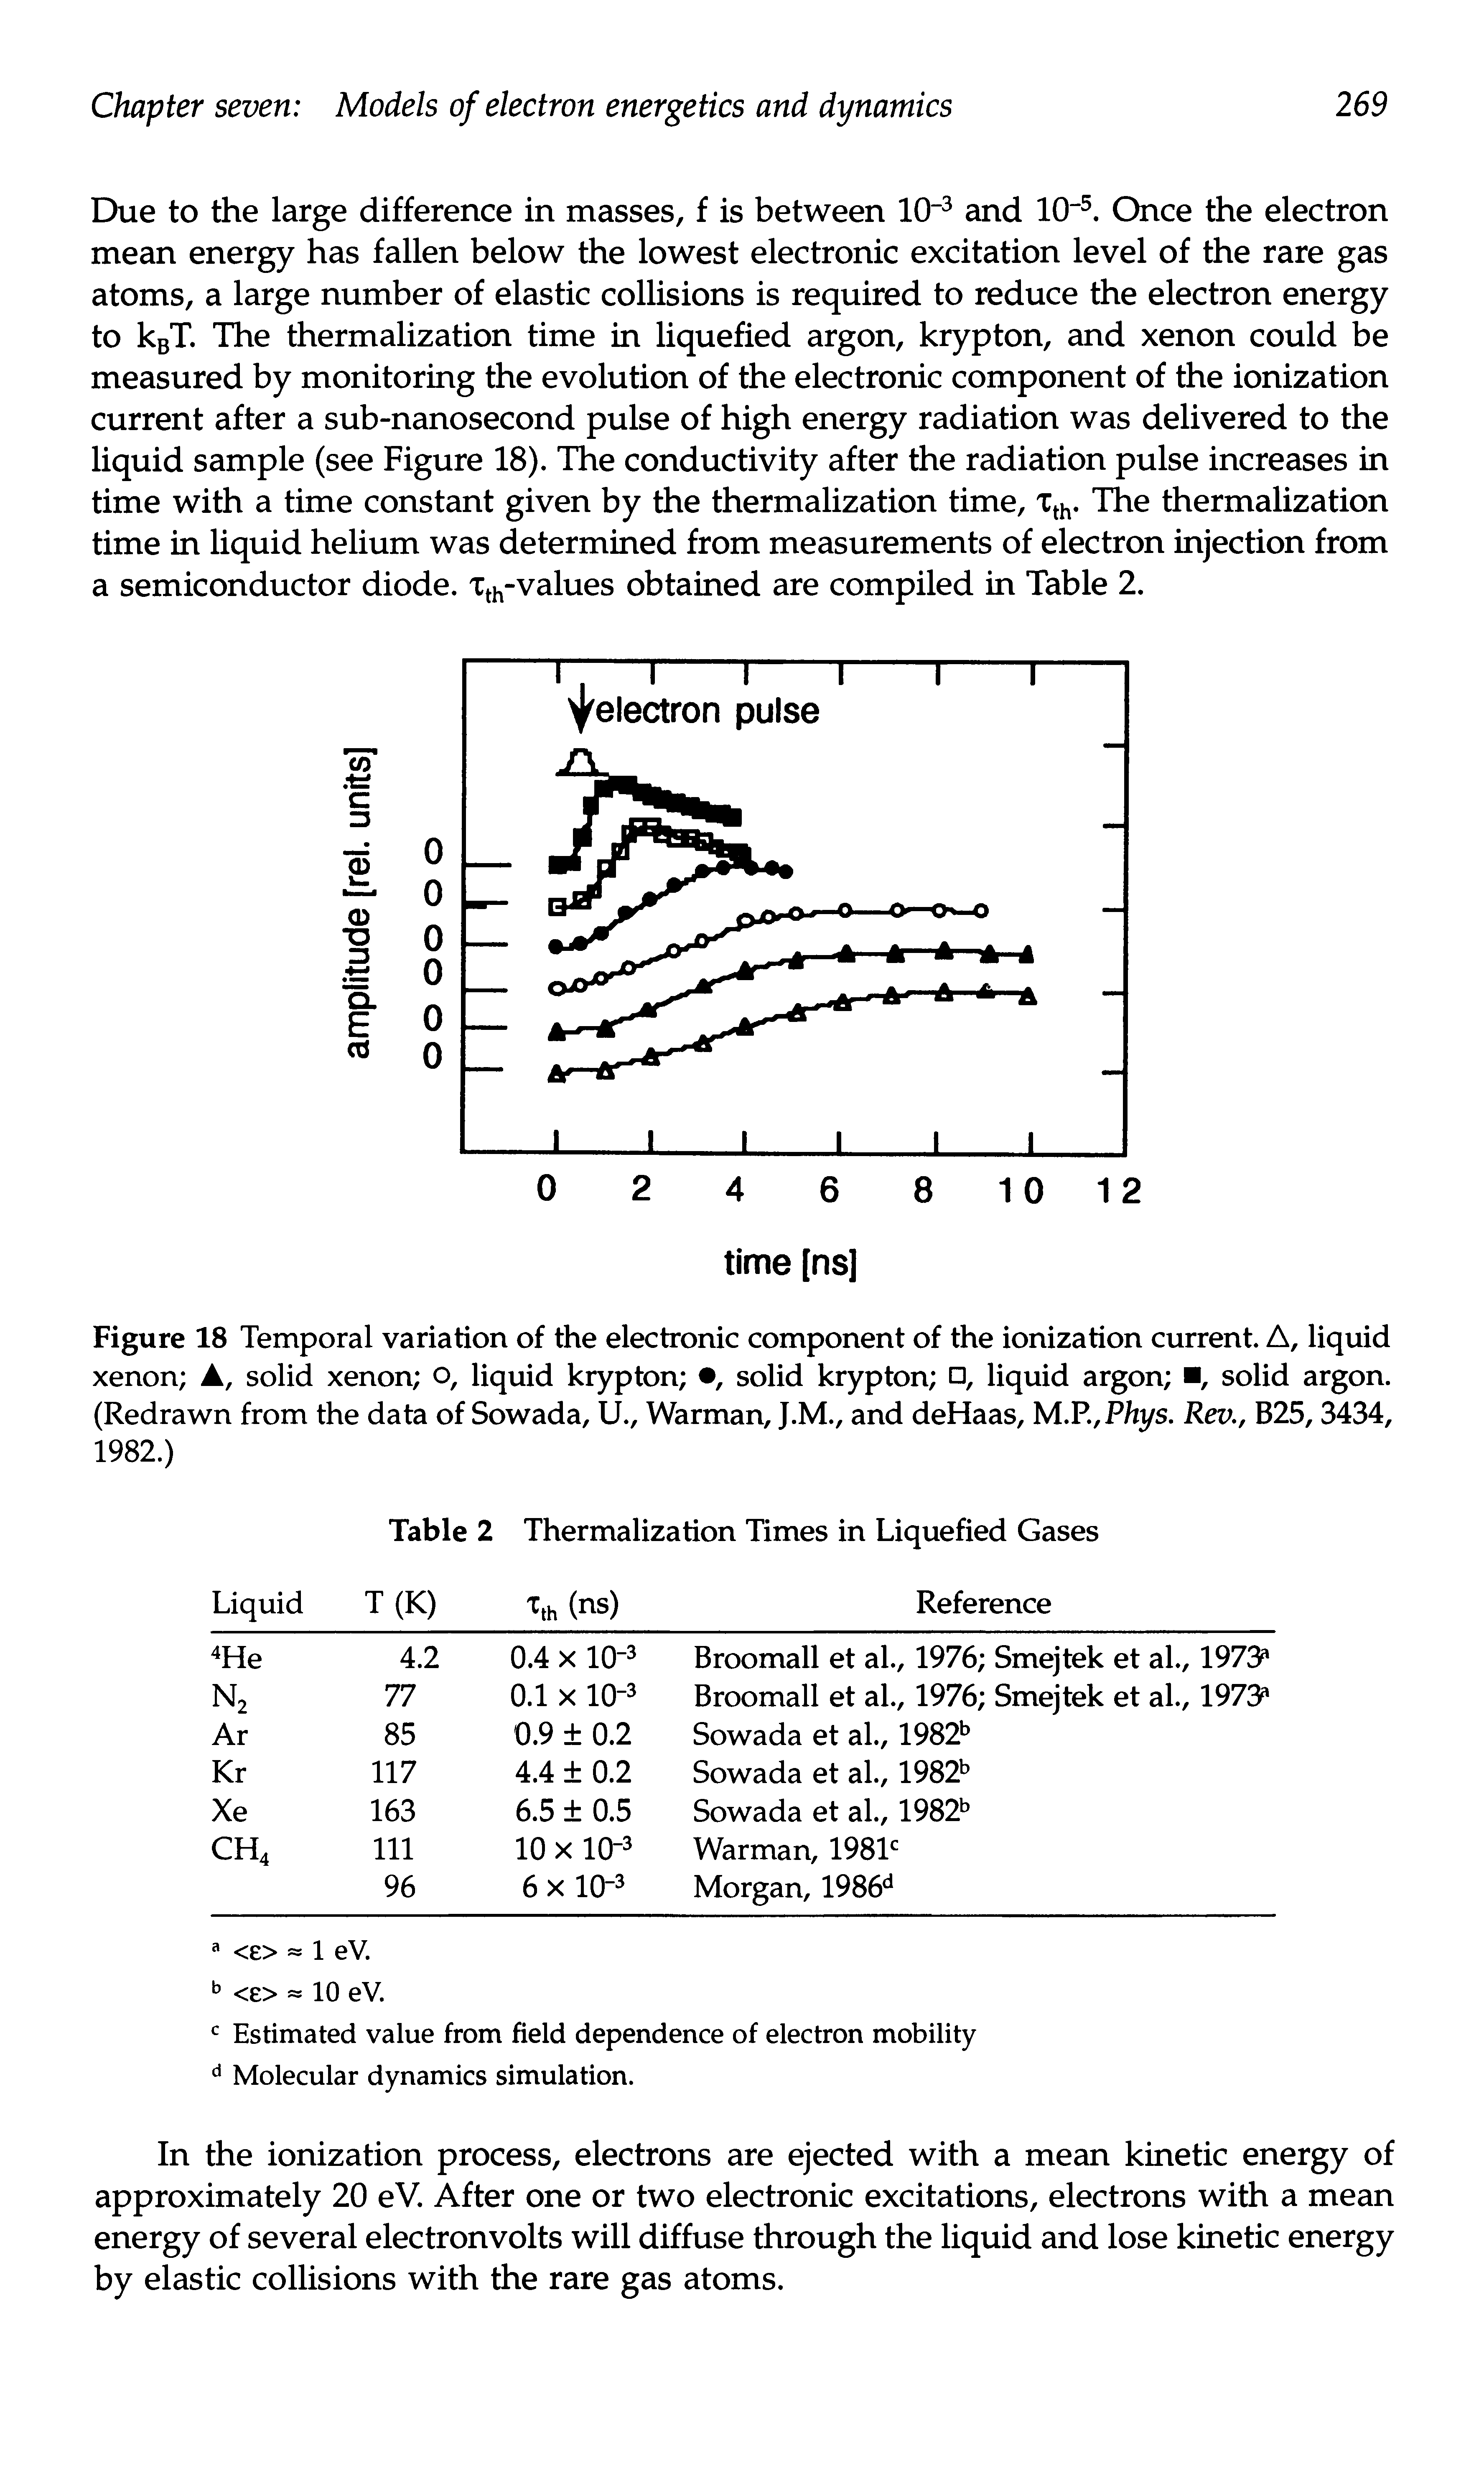 Figure 18 Temporal variation of the electronic component of the ionization current. A, liquid xenon A, solid xenon o, liquid krypton , solid krypton , liquid argon , solid argon. (Redrawn from the data of Sowada, U., Warman, J.M., and deHaas, M.R,P/iys. Rev., B25,3434, 1982.)...